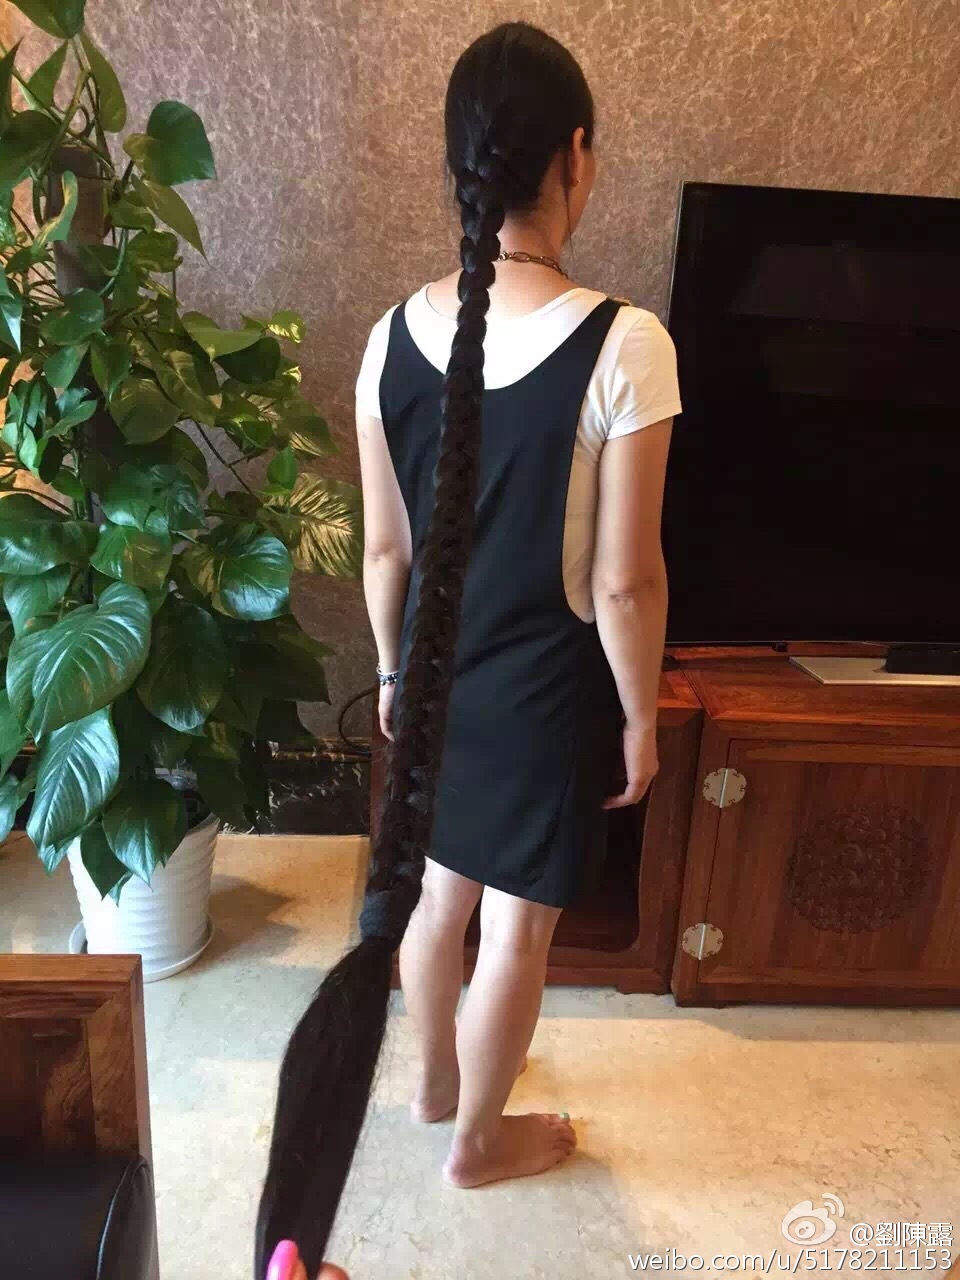 2 meters long hair lady stand on chair